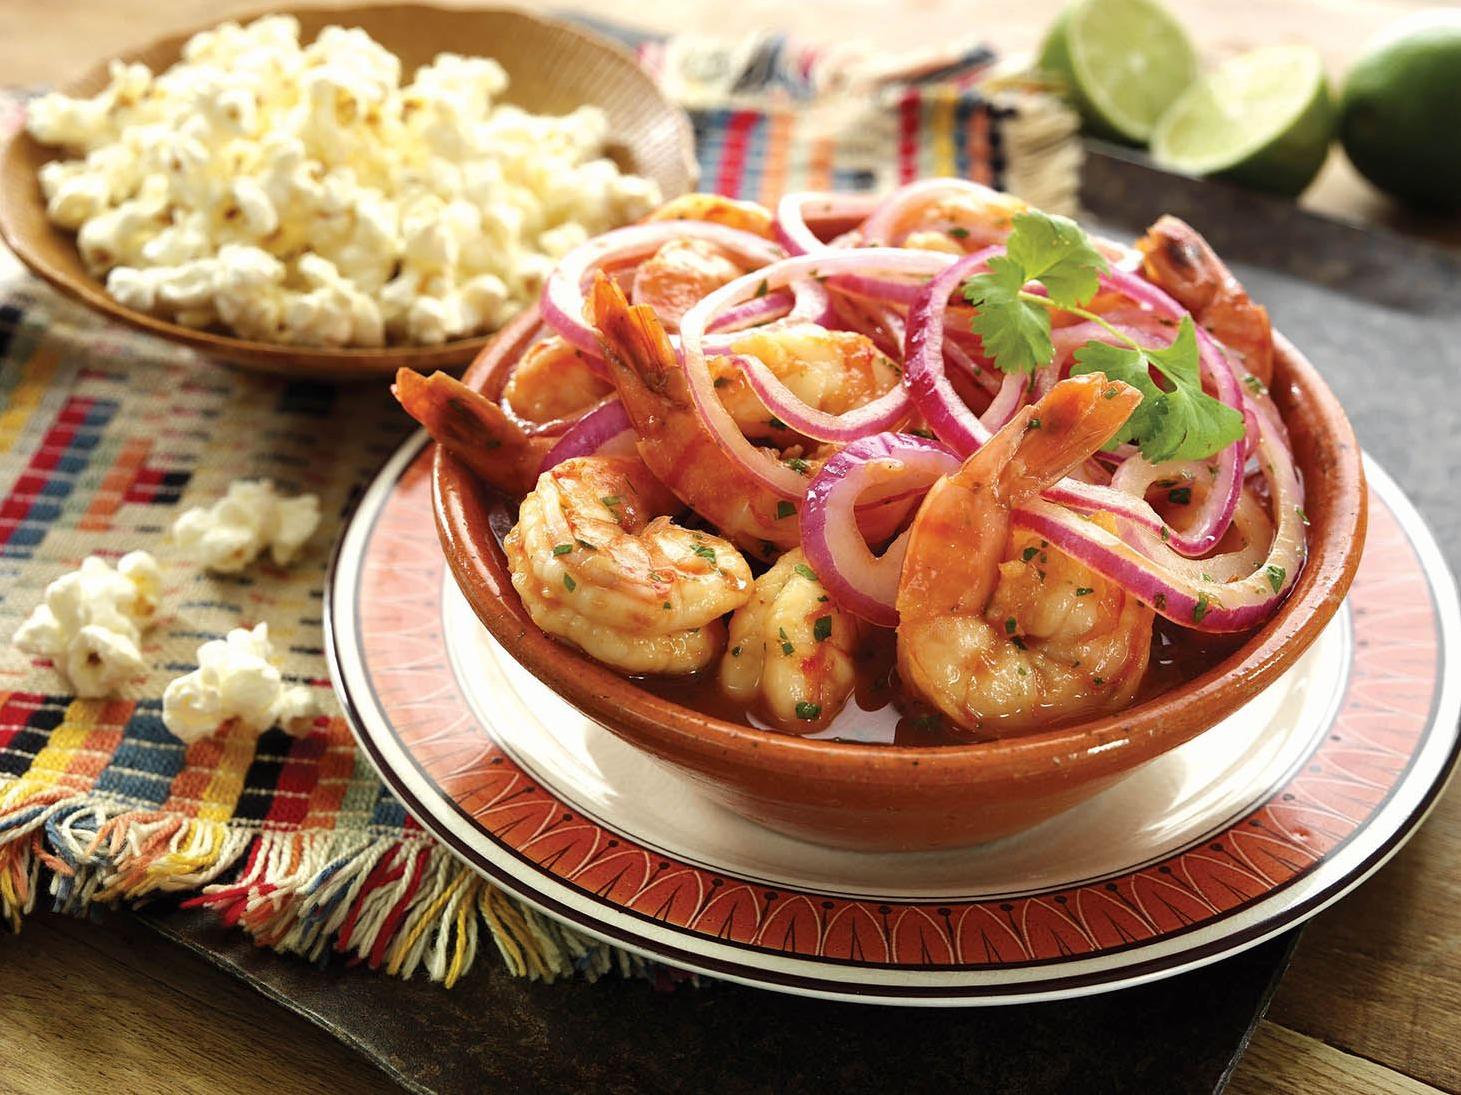  The freshest catch of the day goes into this tangy Ecuadorean ceviche.